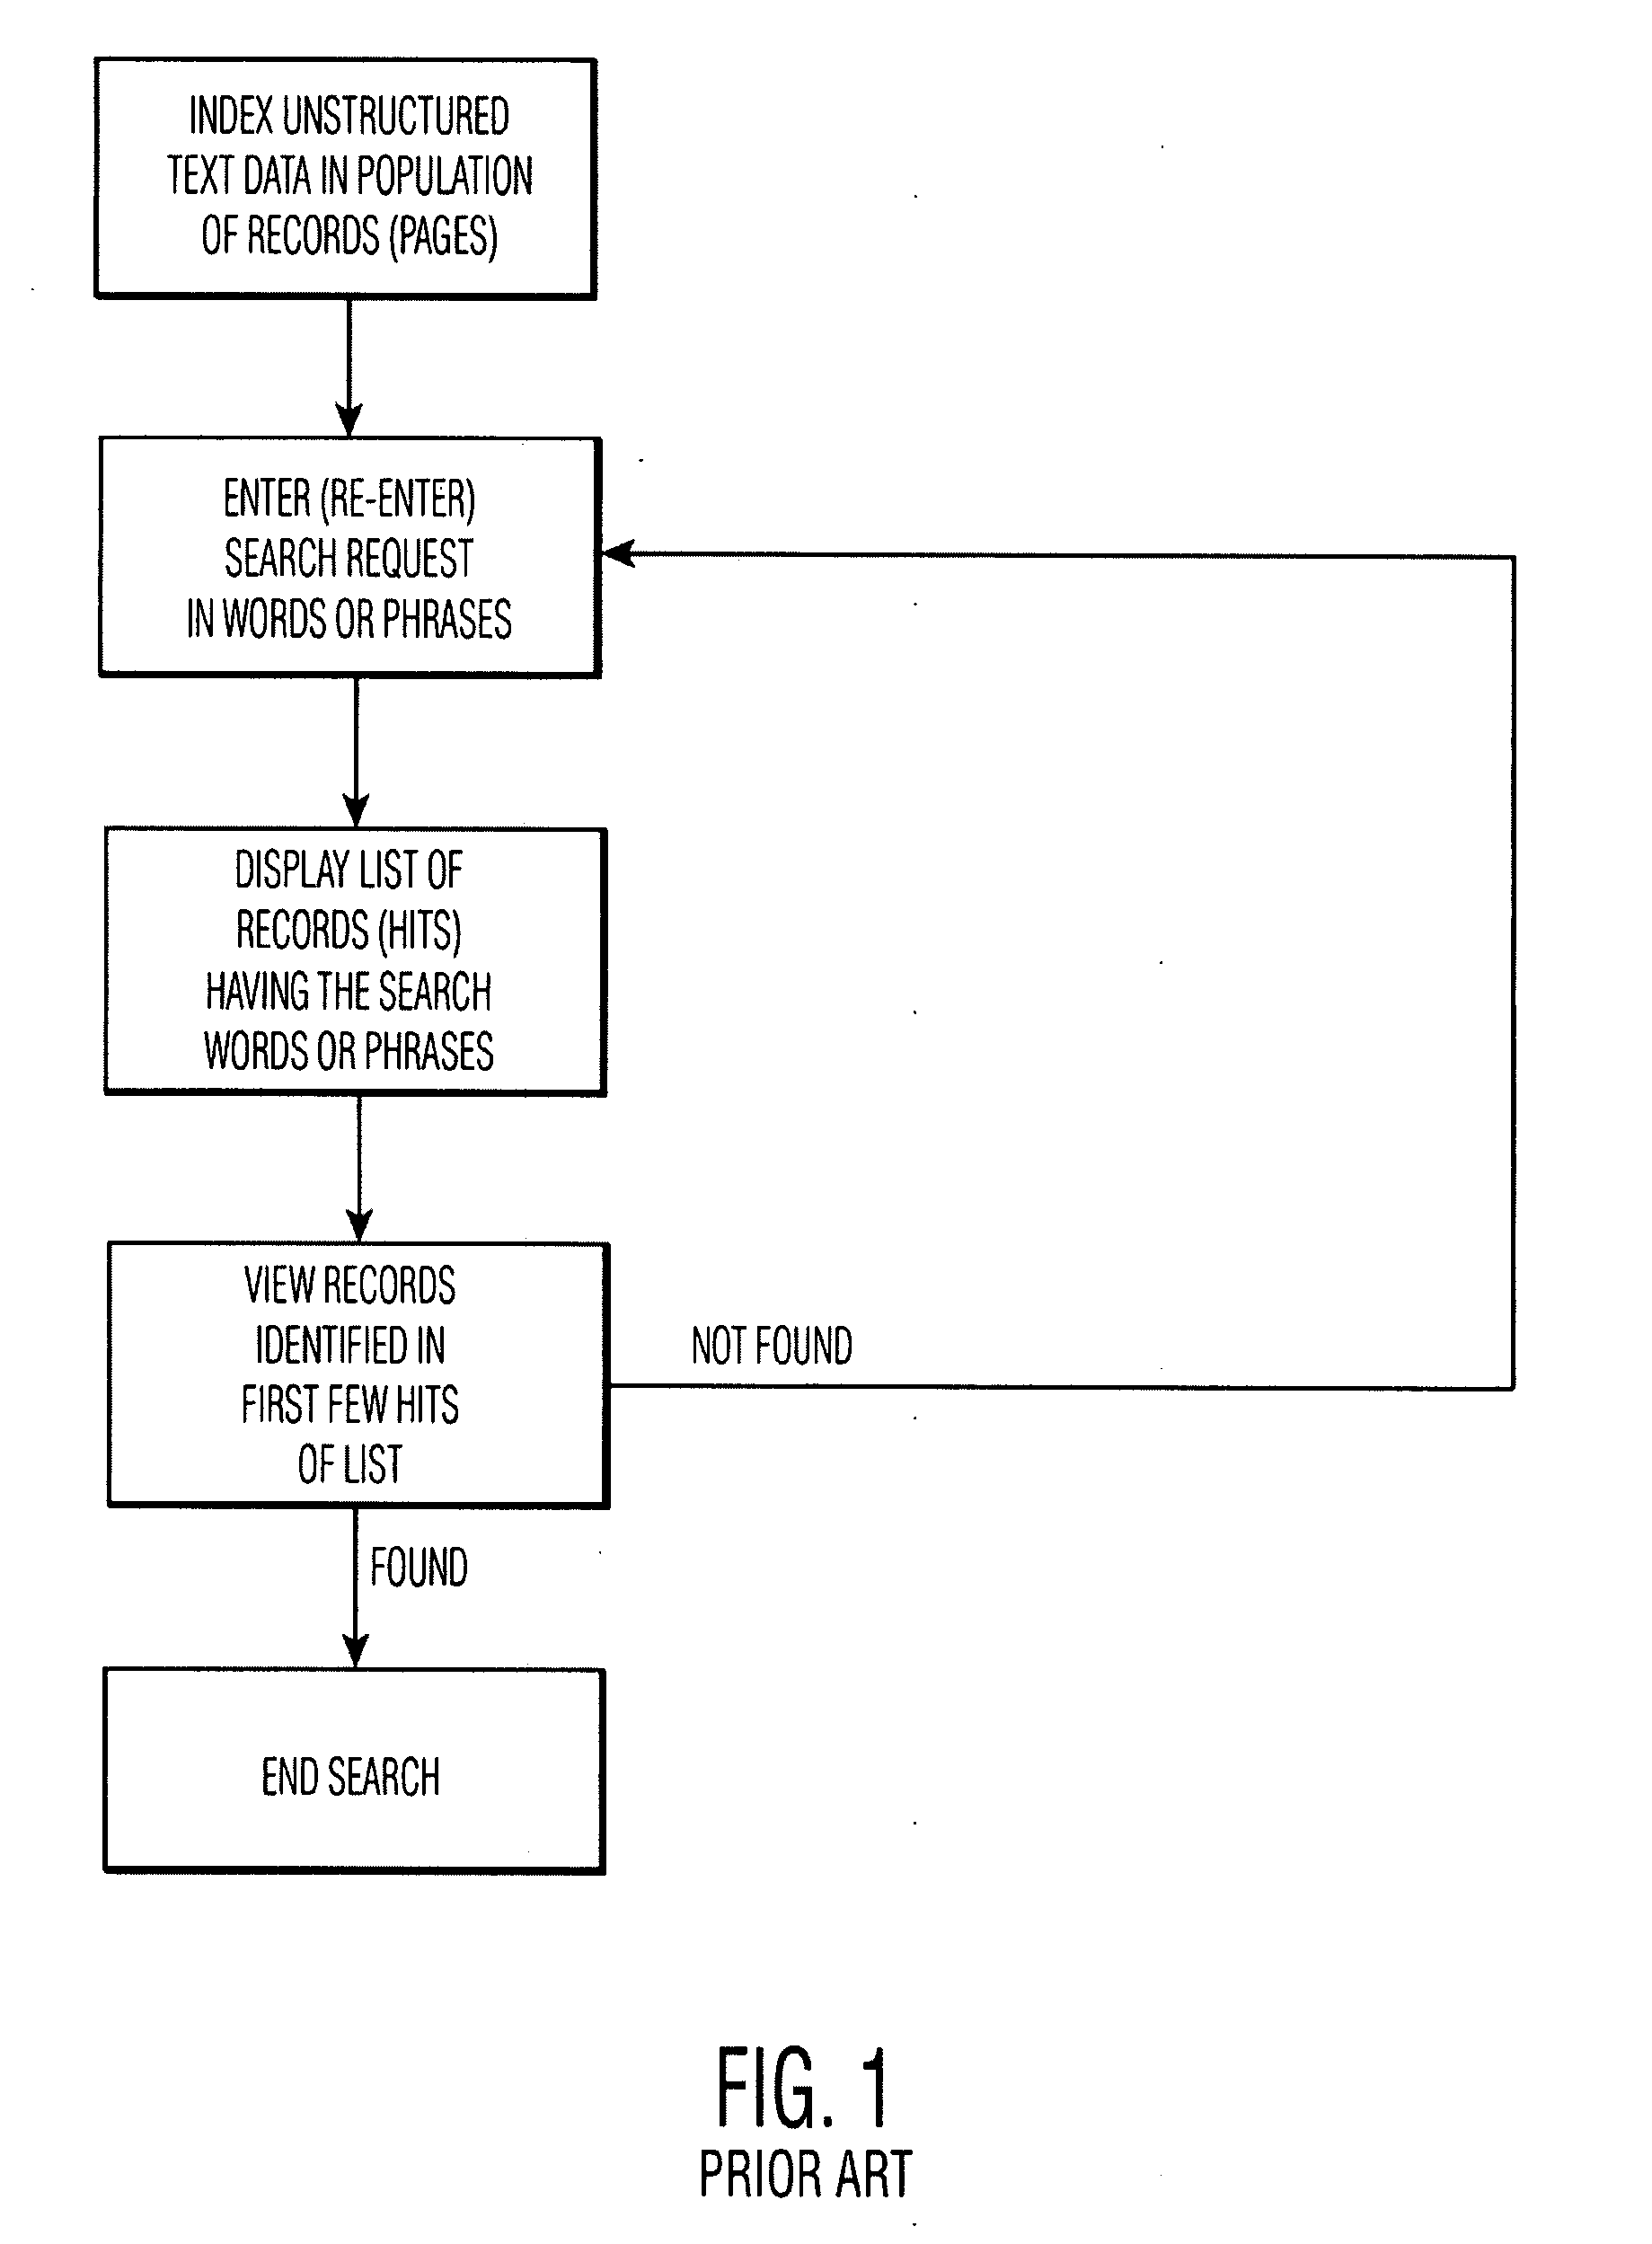 Apparatus and Method for Conducting Searches with a Search Engine for Unstructured Data to Retrieve Records Enriched with Structured Data and Generate Reports Based Thereon